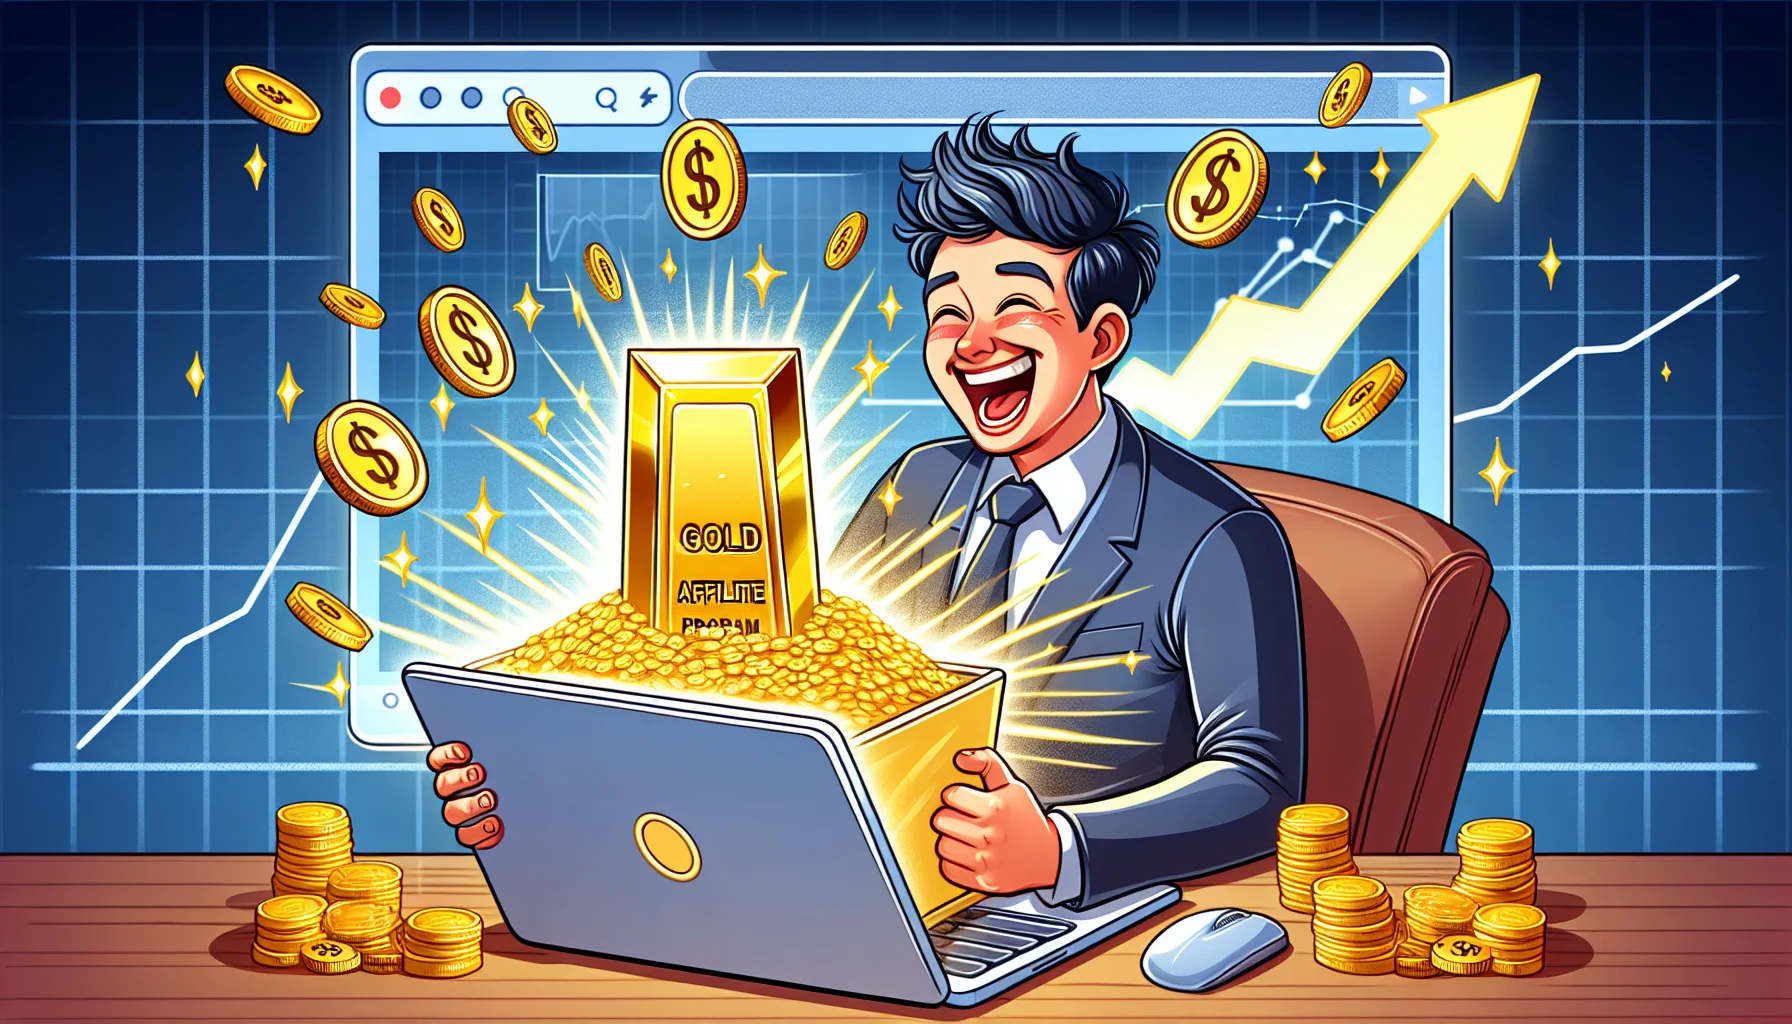 Illustrate a humorous and realistic scenario related to making money online. Show a person of Hispanic descent gleefully working at a laptop, their screen glowing with a representation of a shining gold bar symbolizing the Goldco Affiliate Program. Coins are pouring out from the screen, filling the room. Gold dollar signs orbit the person as if defying gravity. The background includes digital charts climbing upwards, indicating positive financial growth. Note that the depiction should remain neutral and respectful.